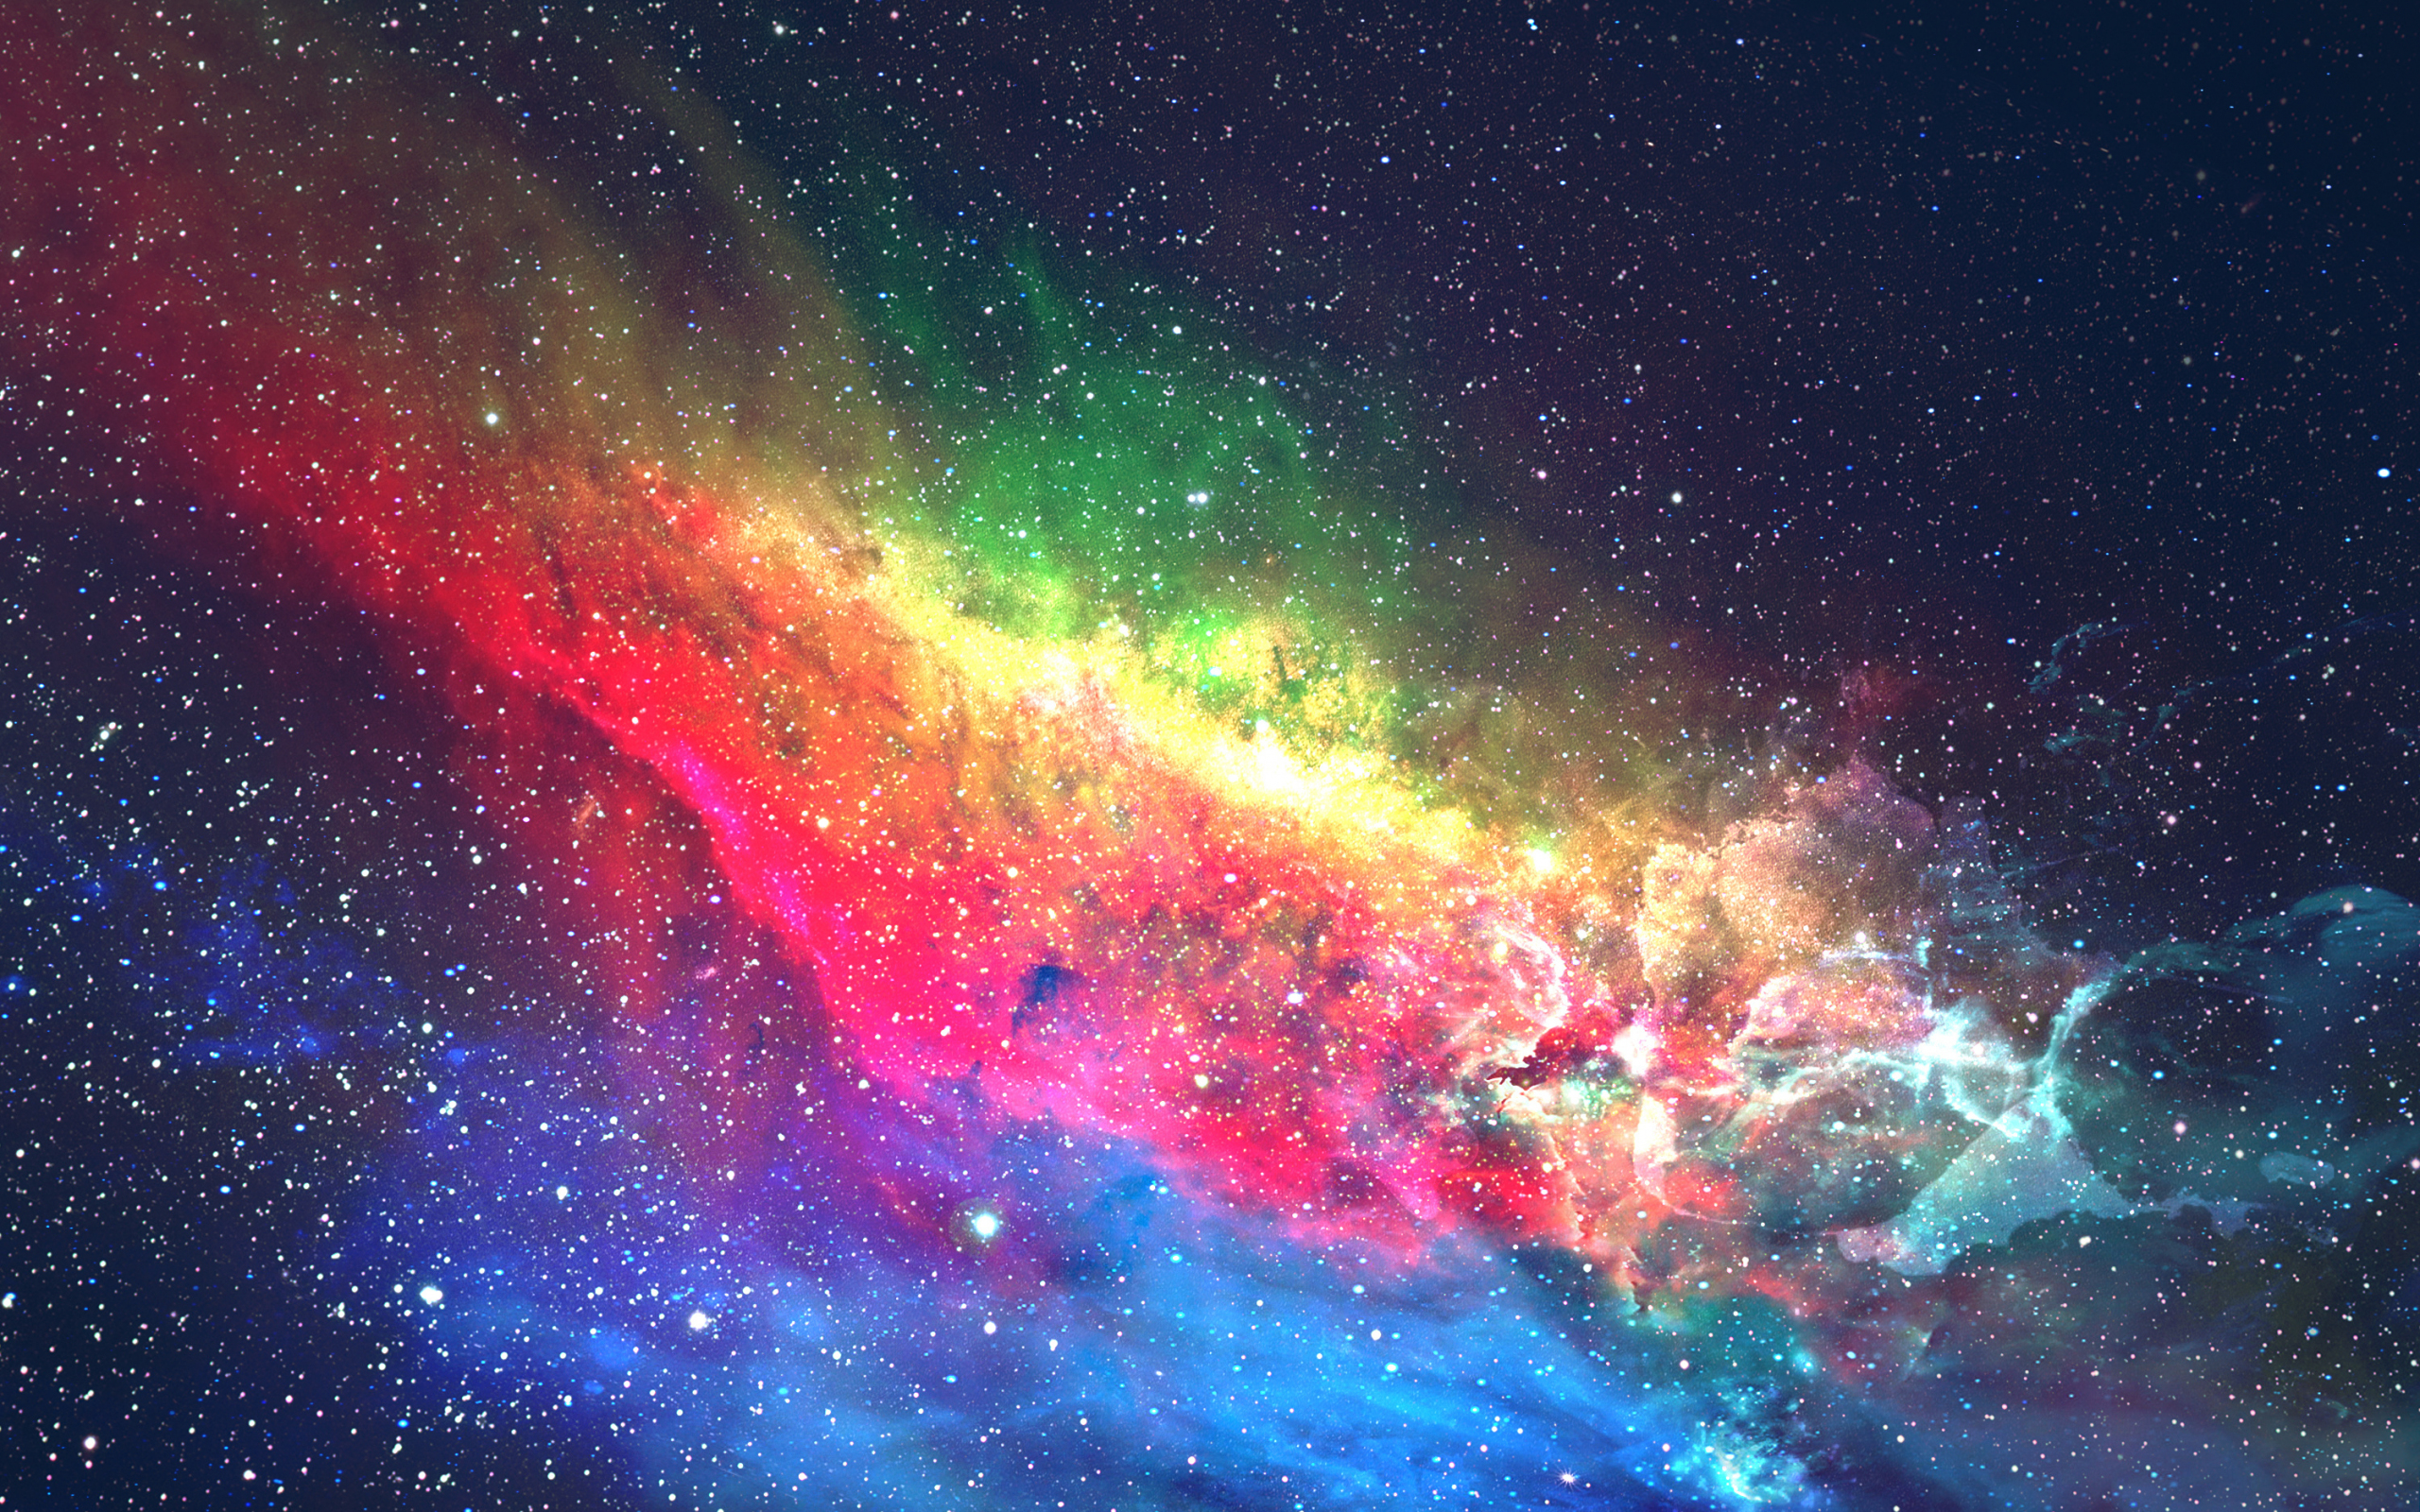 Download 2560x1600 Wallpaper Colorful Galaxy Space Digital Art Dual Wide Widescreen 16 10 Widescreen 2560x1600 Hd Image Background 9195